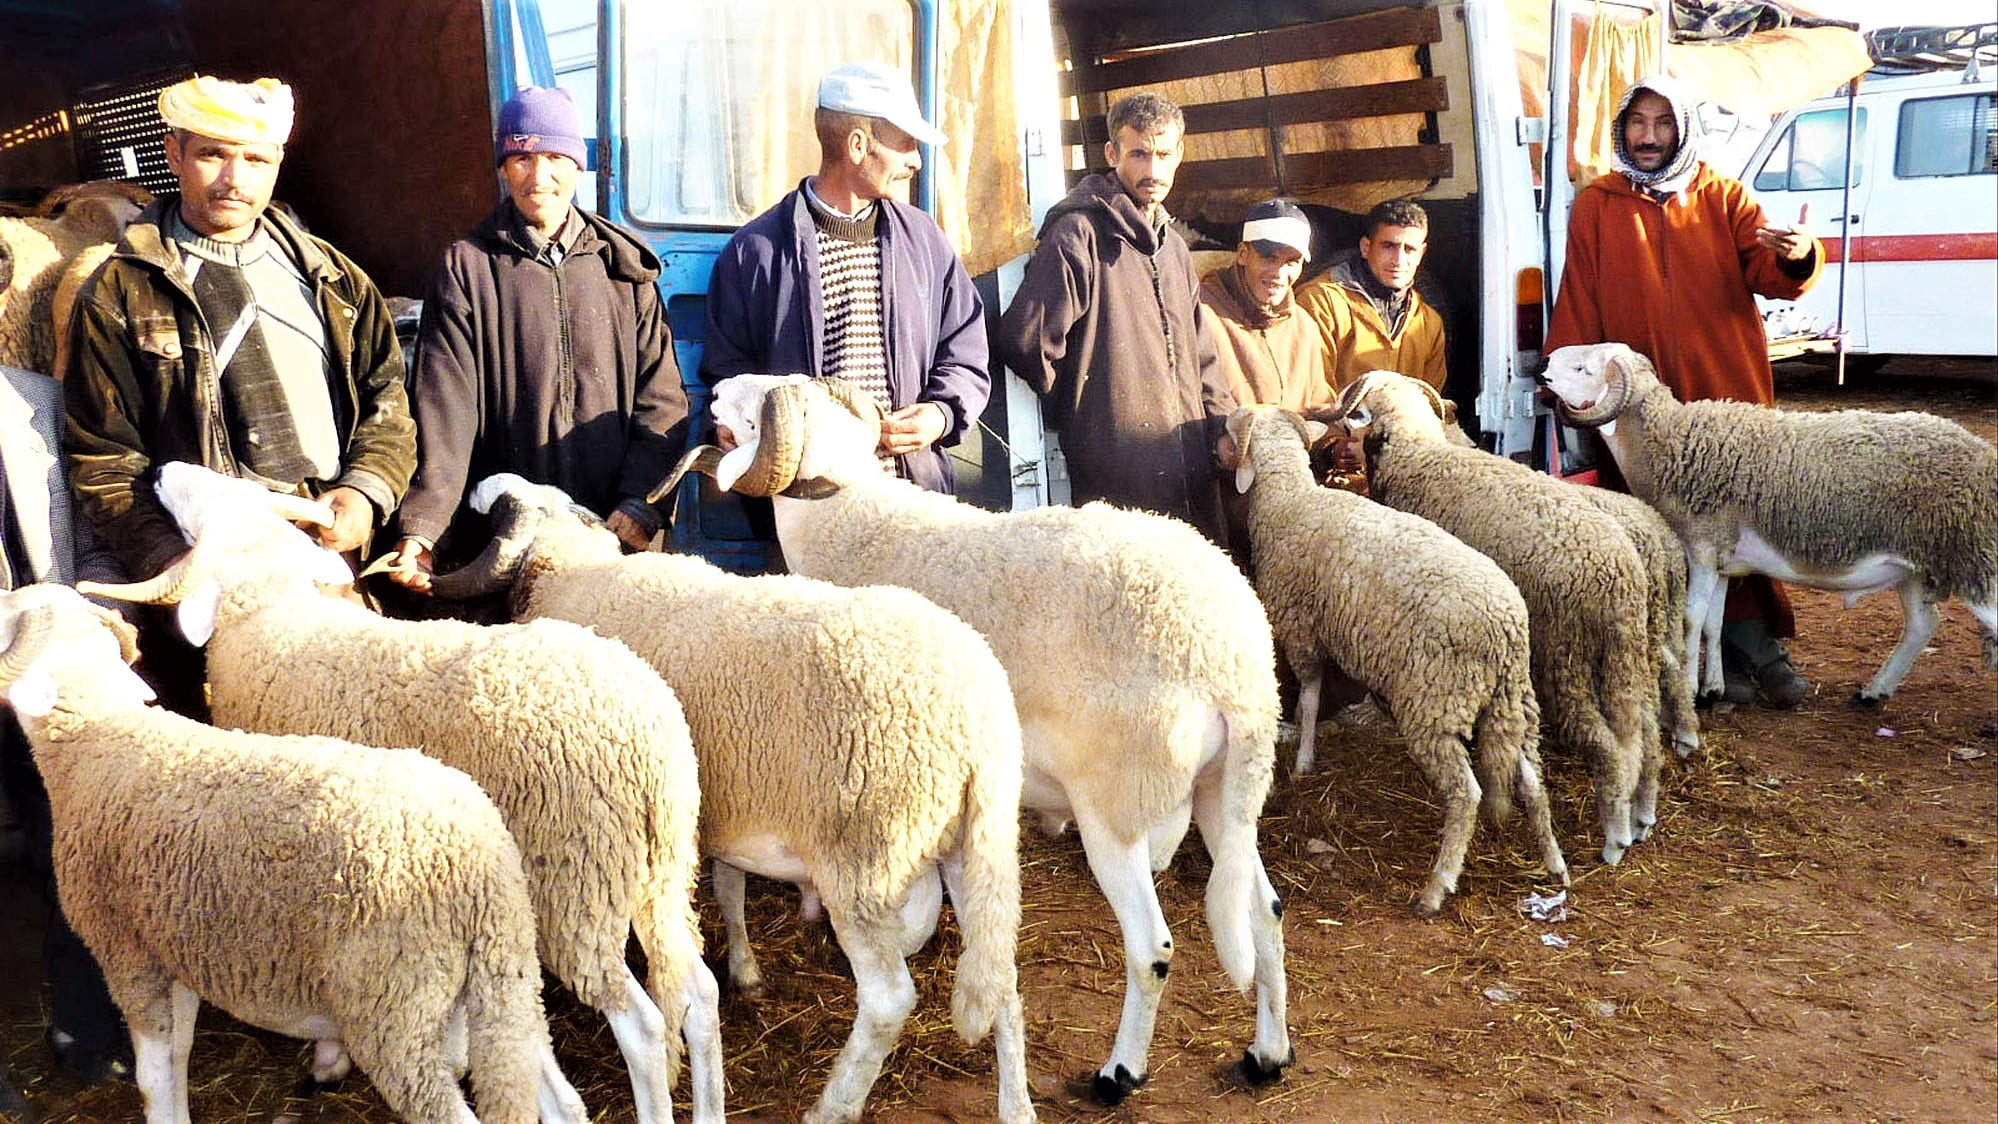 Eid al-Adha in Morocco: Breeders Speak Out on Sheep Prices